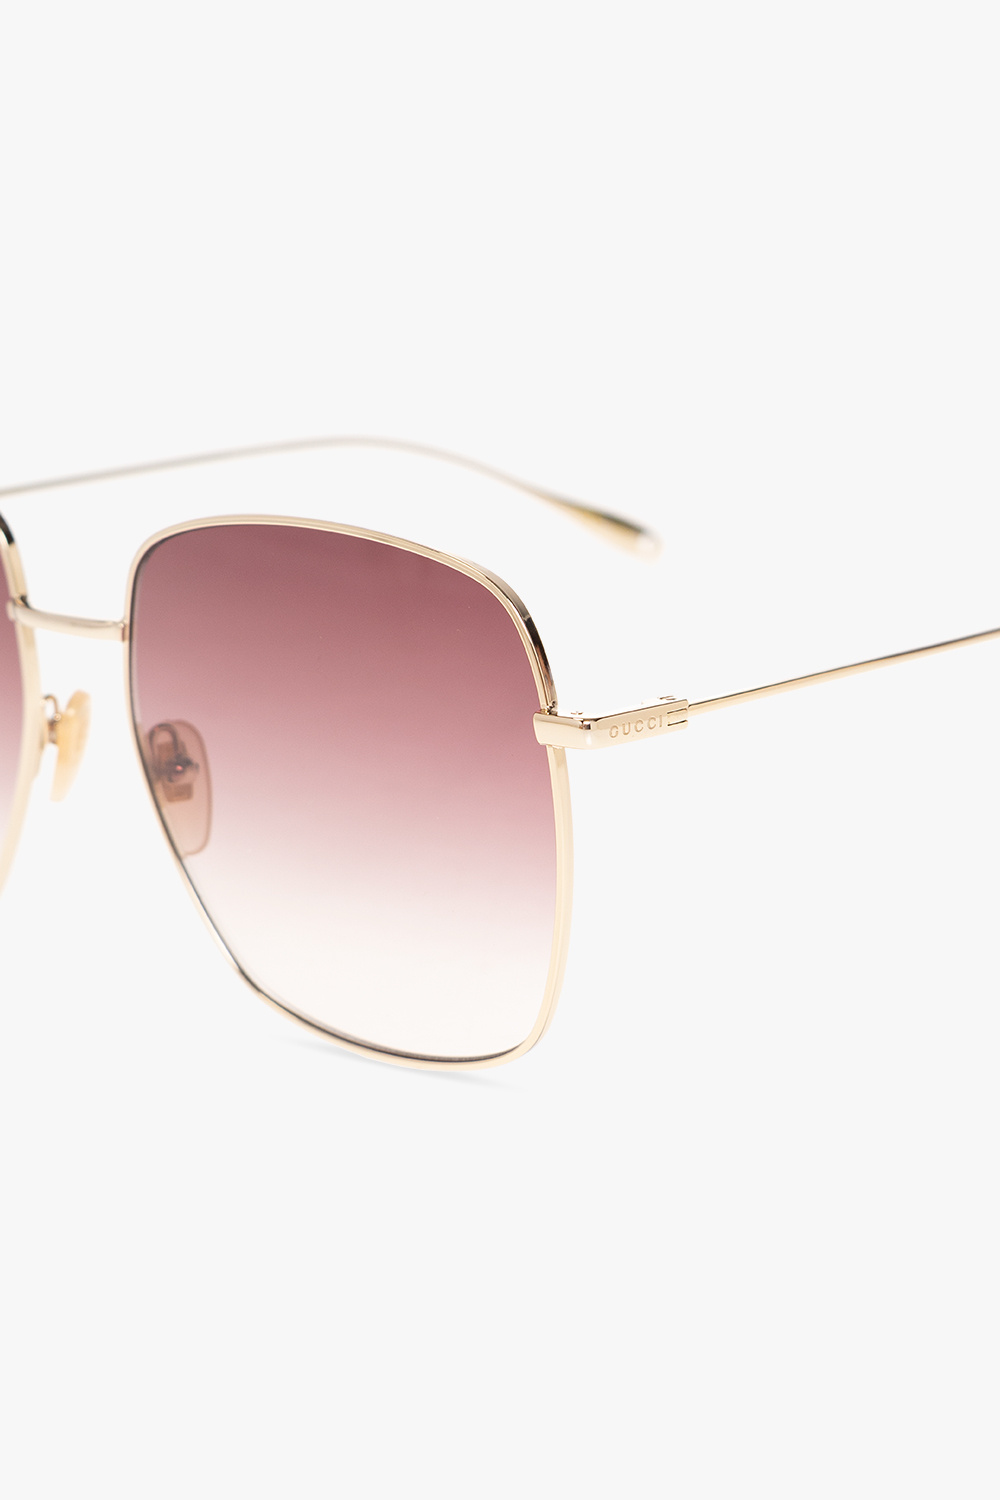 Gucci Sunglasses with fan charms